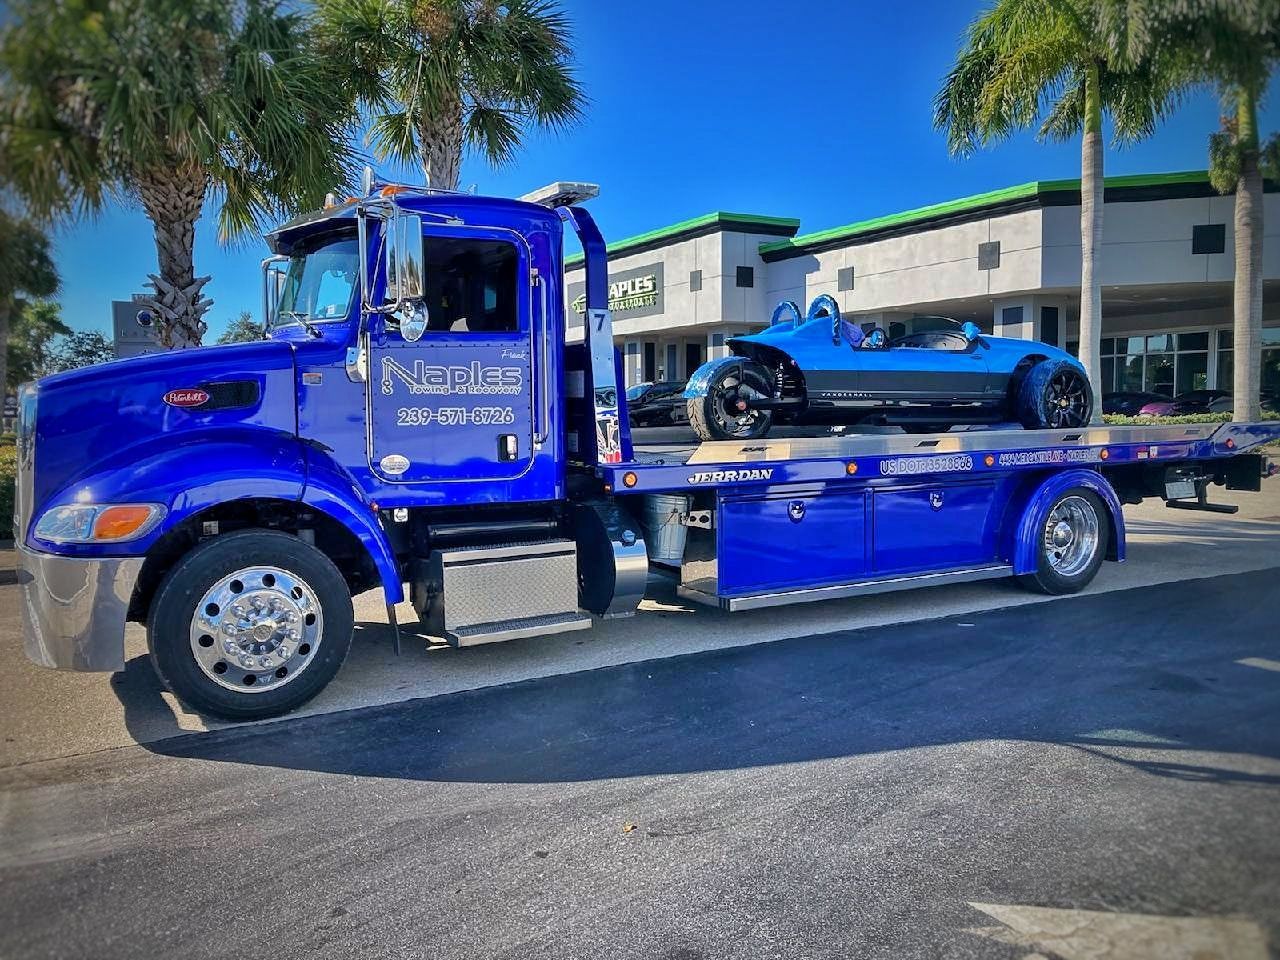 Professional car towing services in Naples, FL provided by Naples Towing and Recovery.